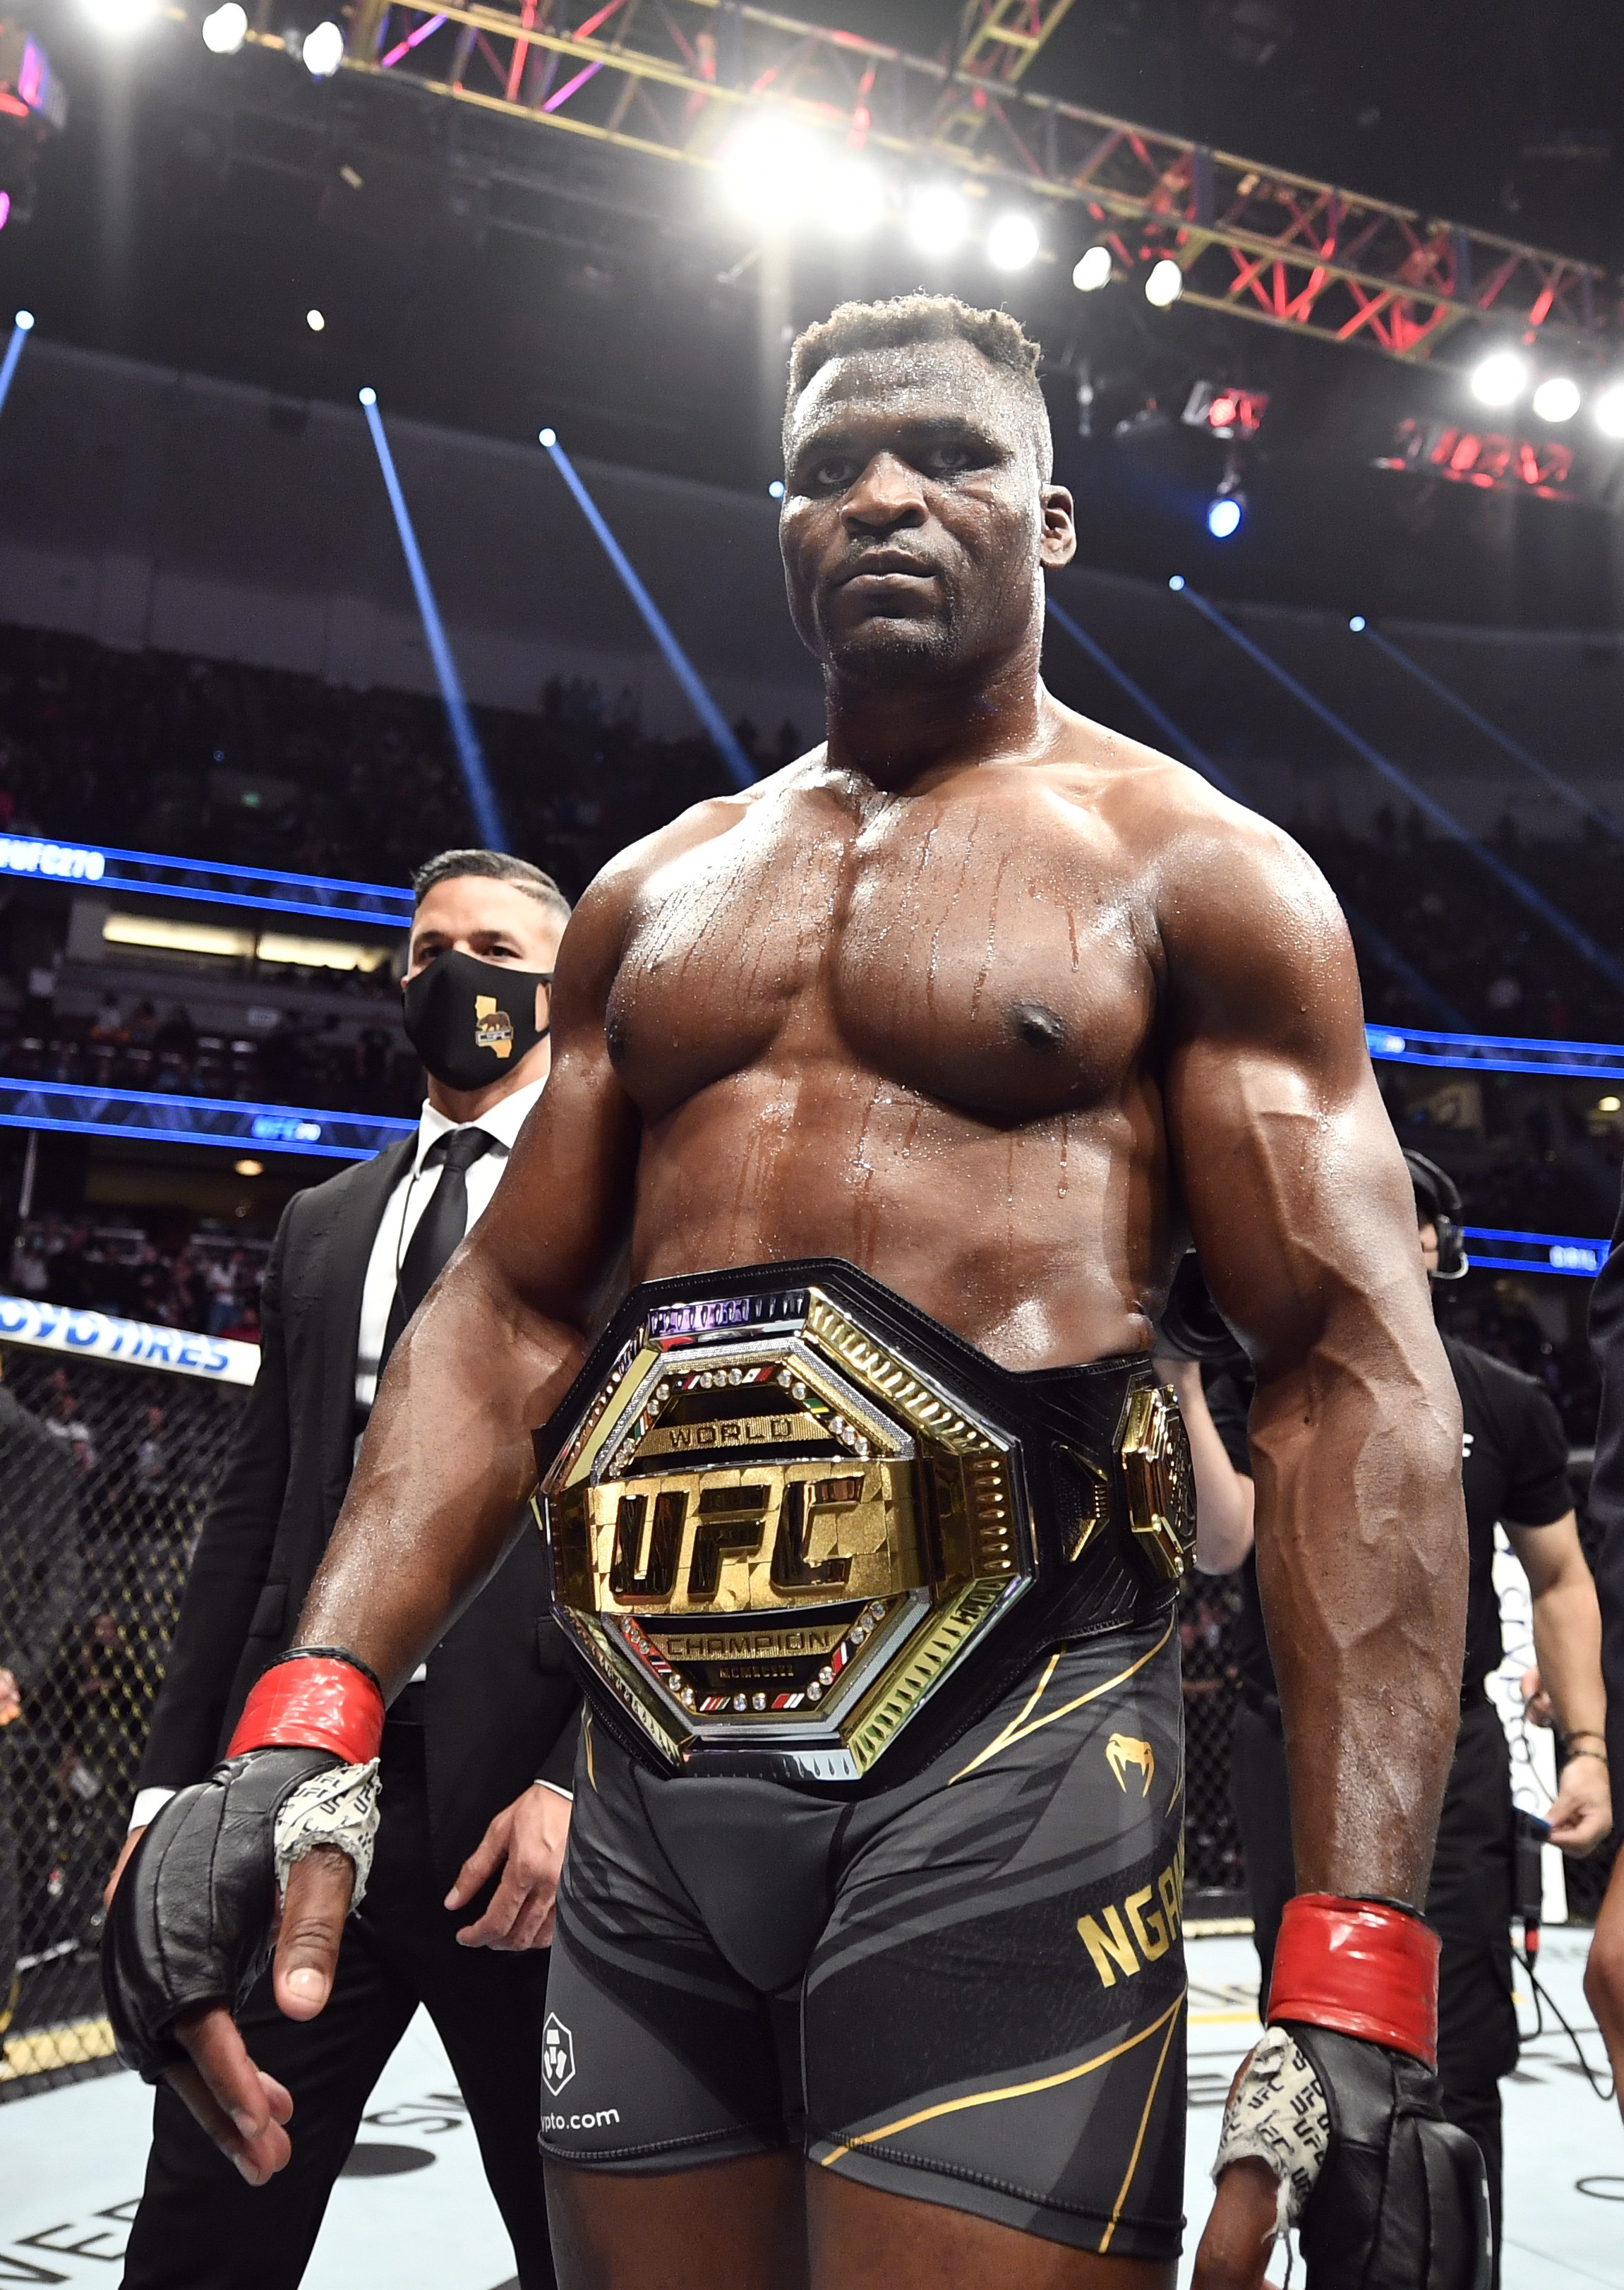 ANAHEIM, CALIFORNIA - JANUARY 22: Francis Ngannou of Cameroon celebrates after his victory over Ciryl Gane of France in their UFC heavyweight championship fight during the UFC 270 event at Honda Center on January 22, 2022 in Anaheim, California. (Photo by Chris Unger/Zuffa LLC)